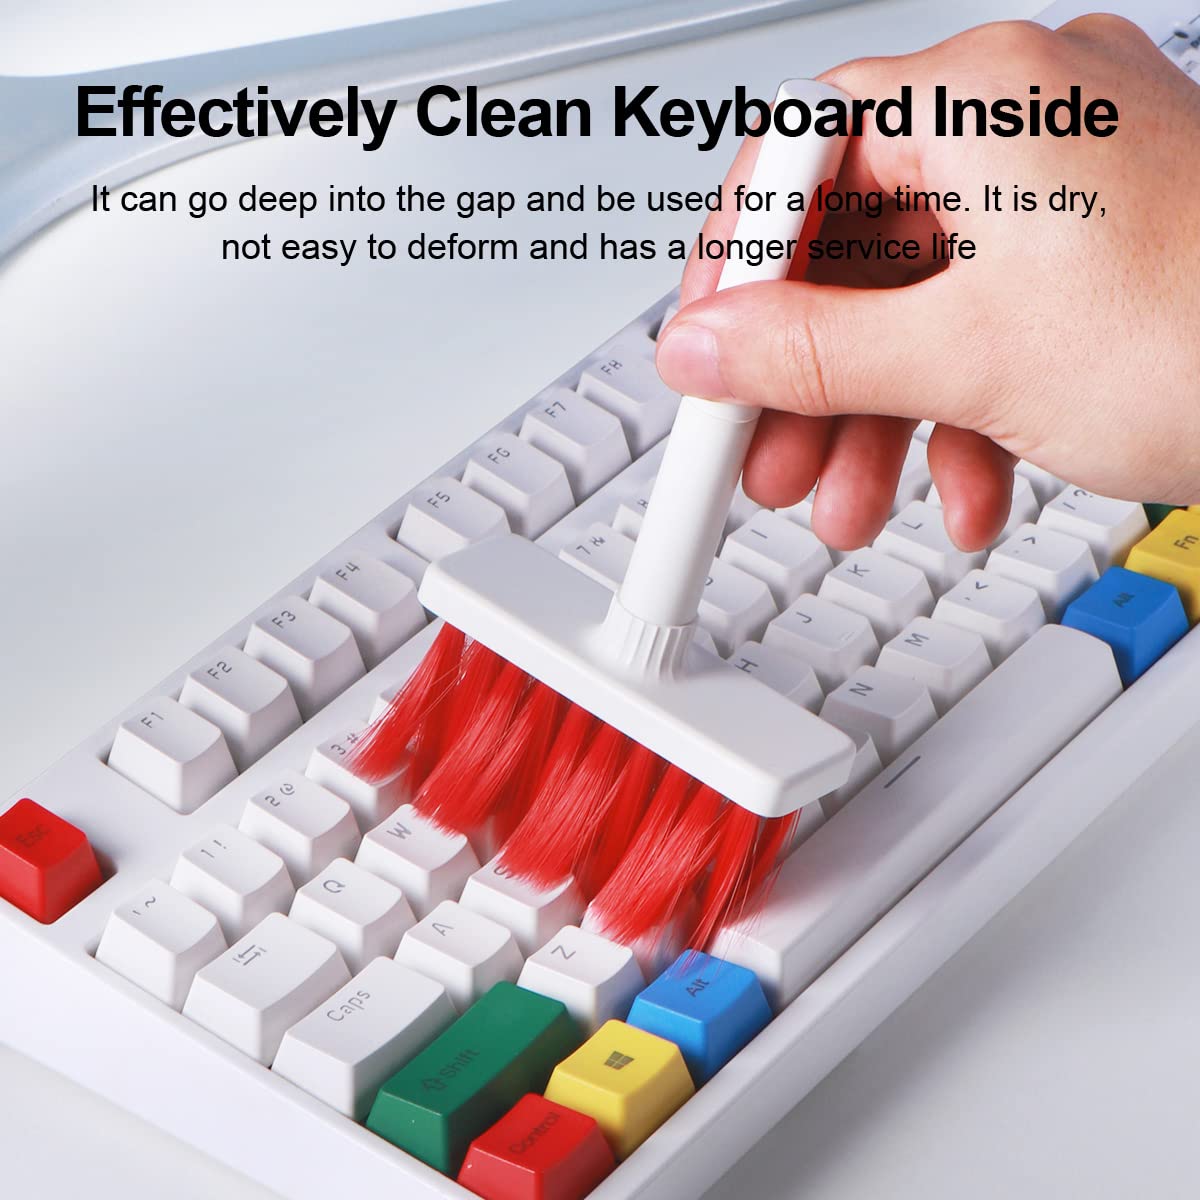 Inspect the keyboard for any visible physical damage or debris
Clean the keyboard using compressed air or a soft brush